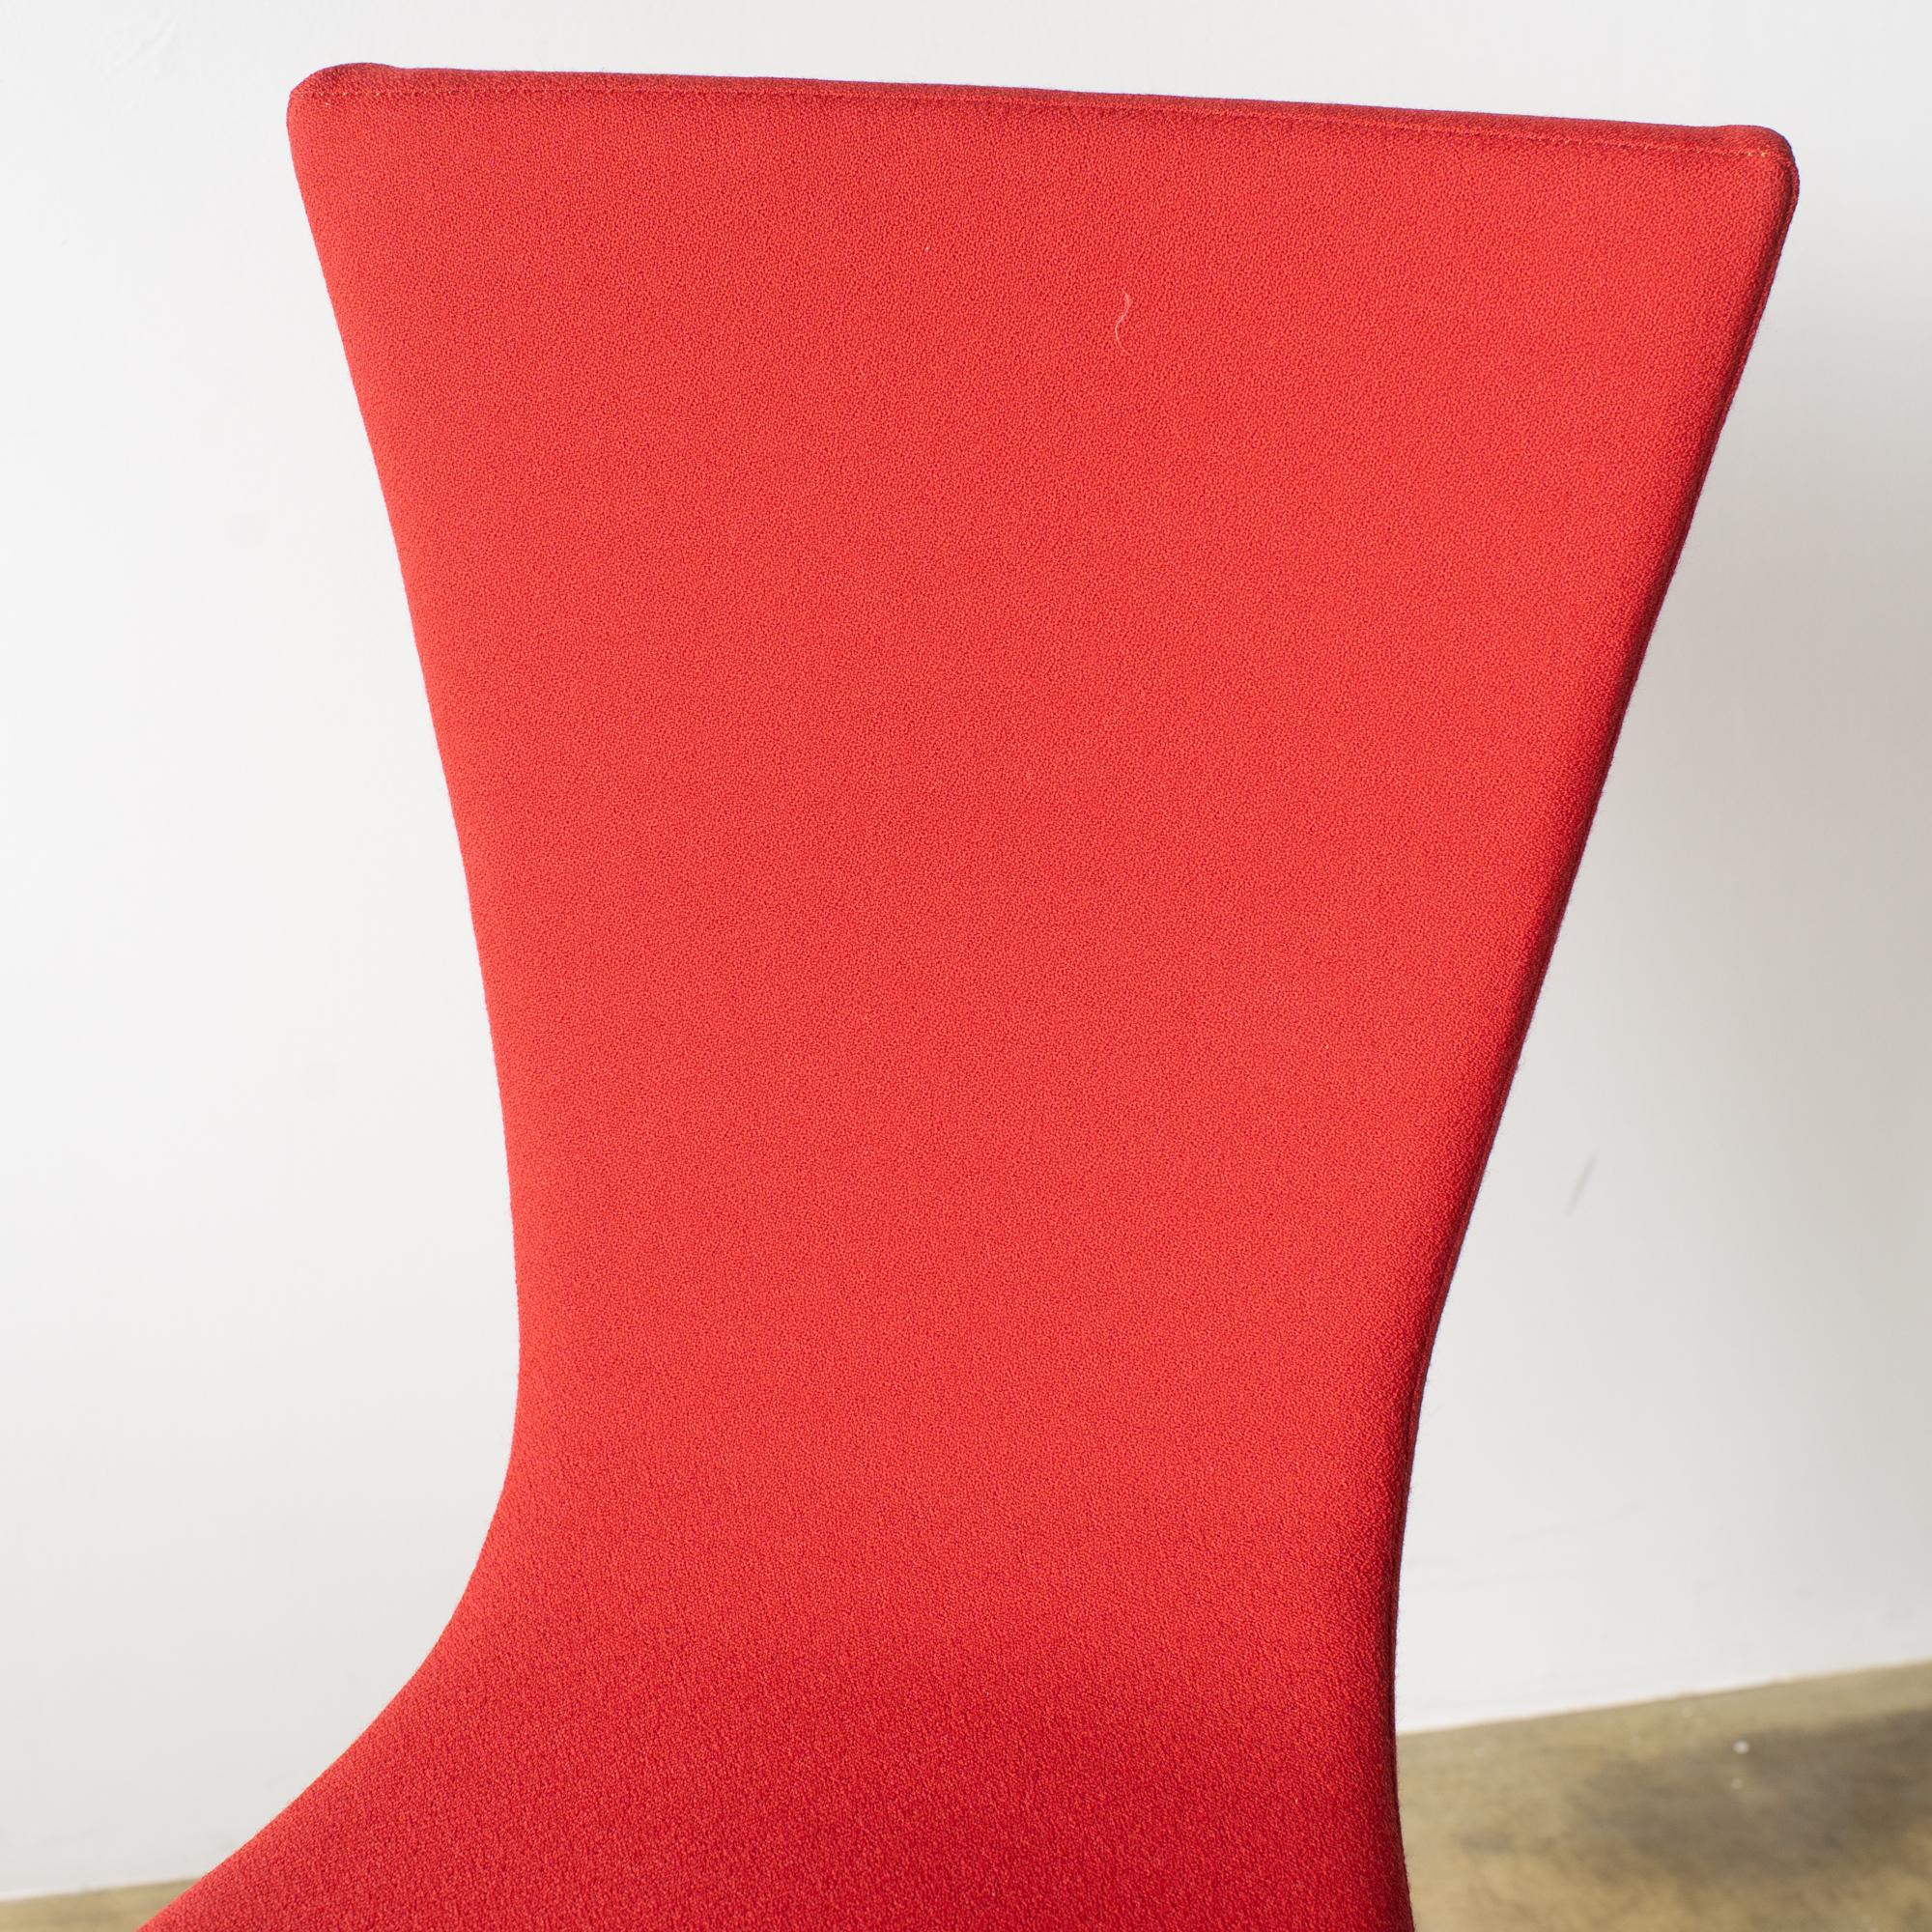 Contemporary Chair red fabric chair Christian Ghion  Y2K style design space age For Sale